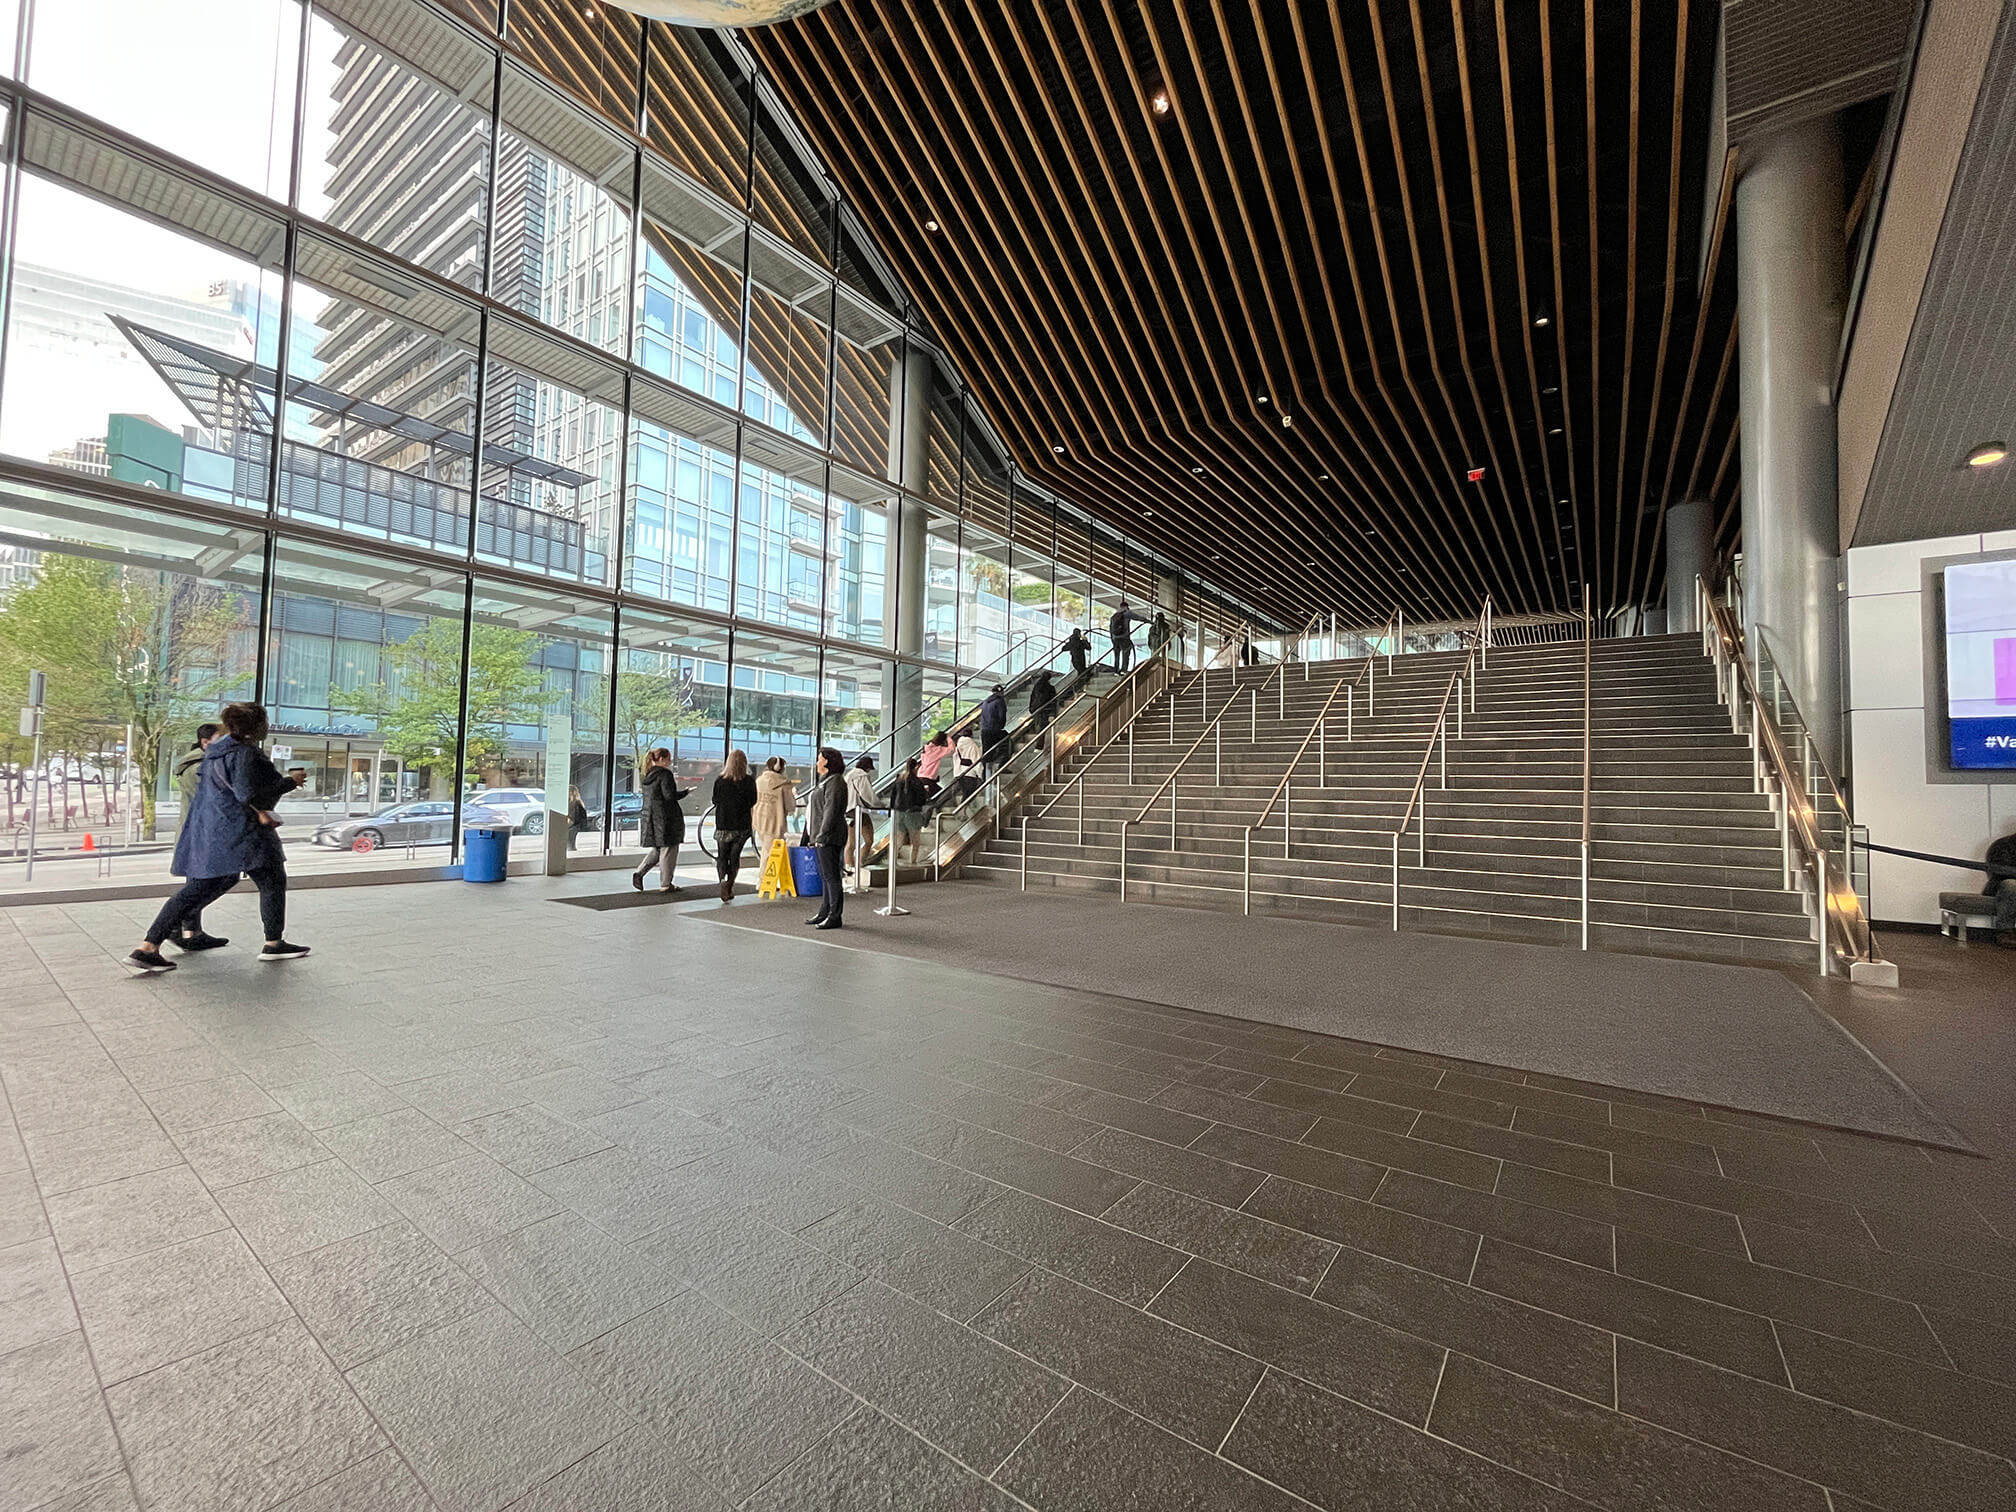 View of the stairs and escalator at the main entrance foyer, leading to the conference hall level. Escalators are to the left of the stairs.